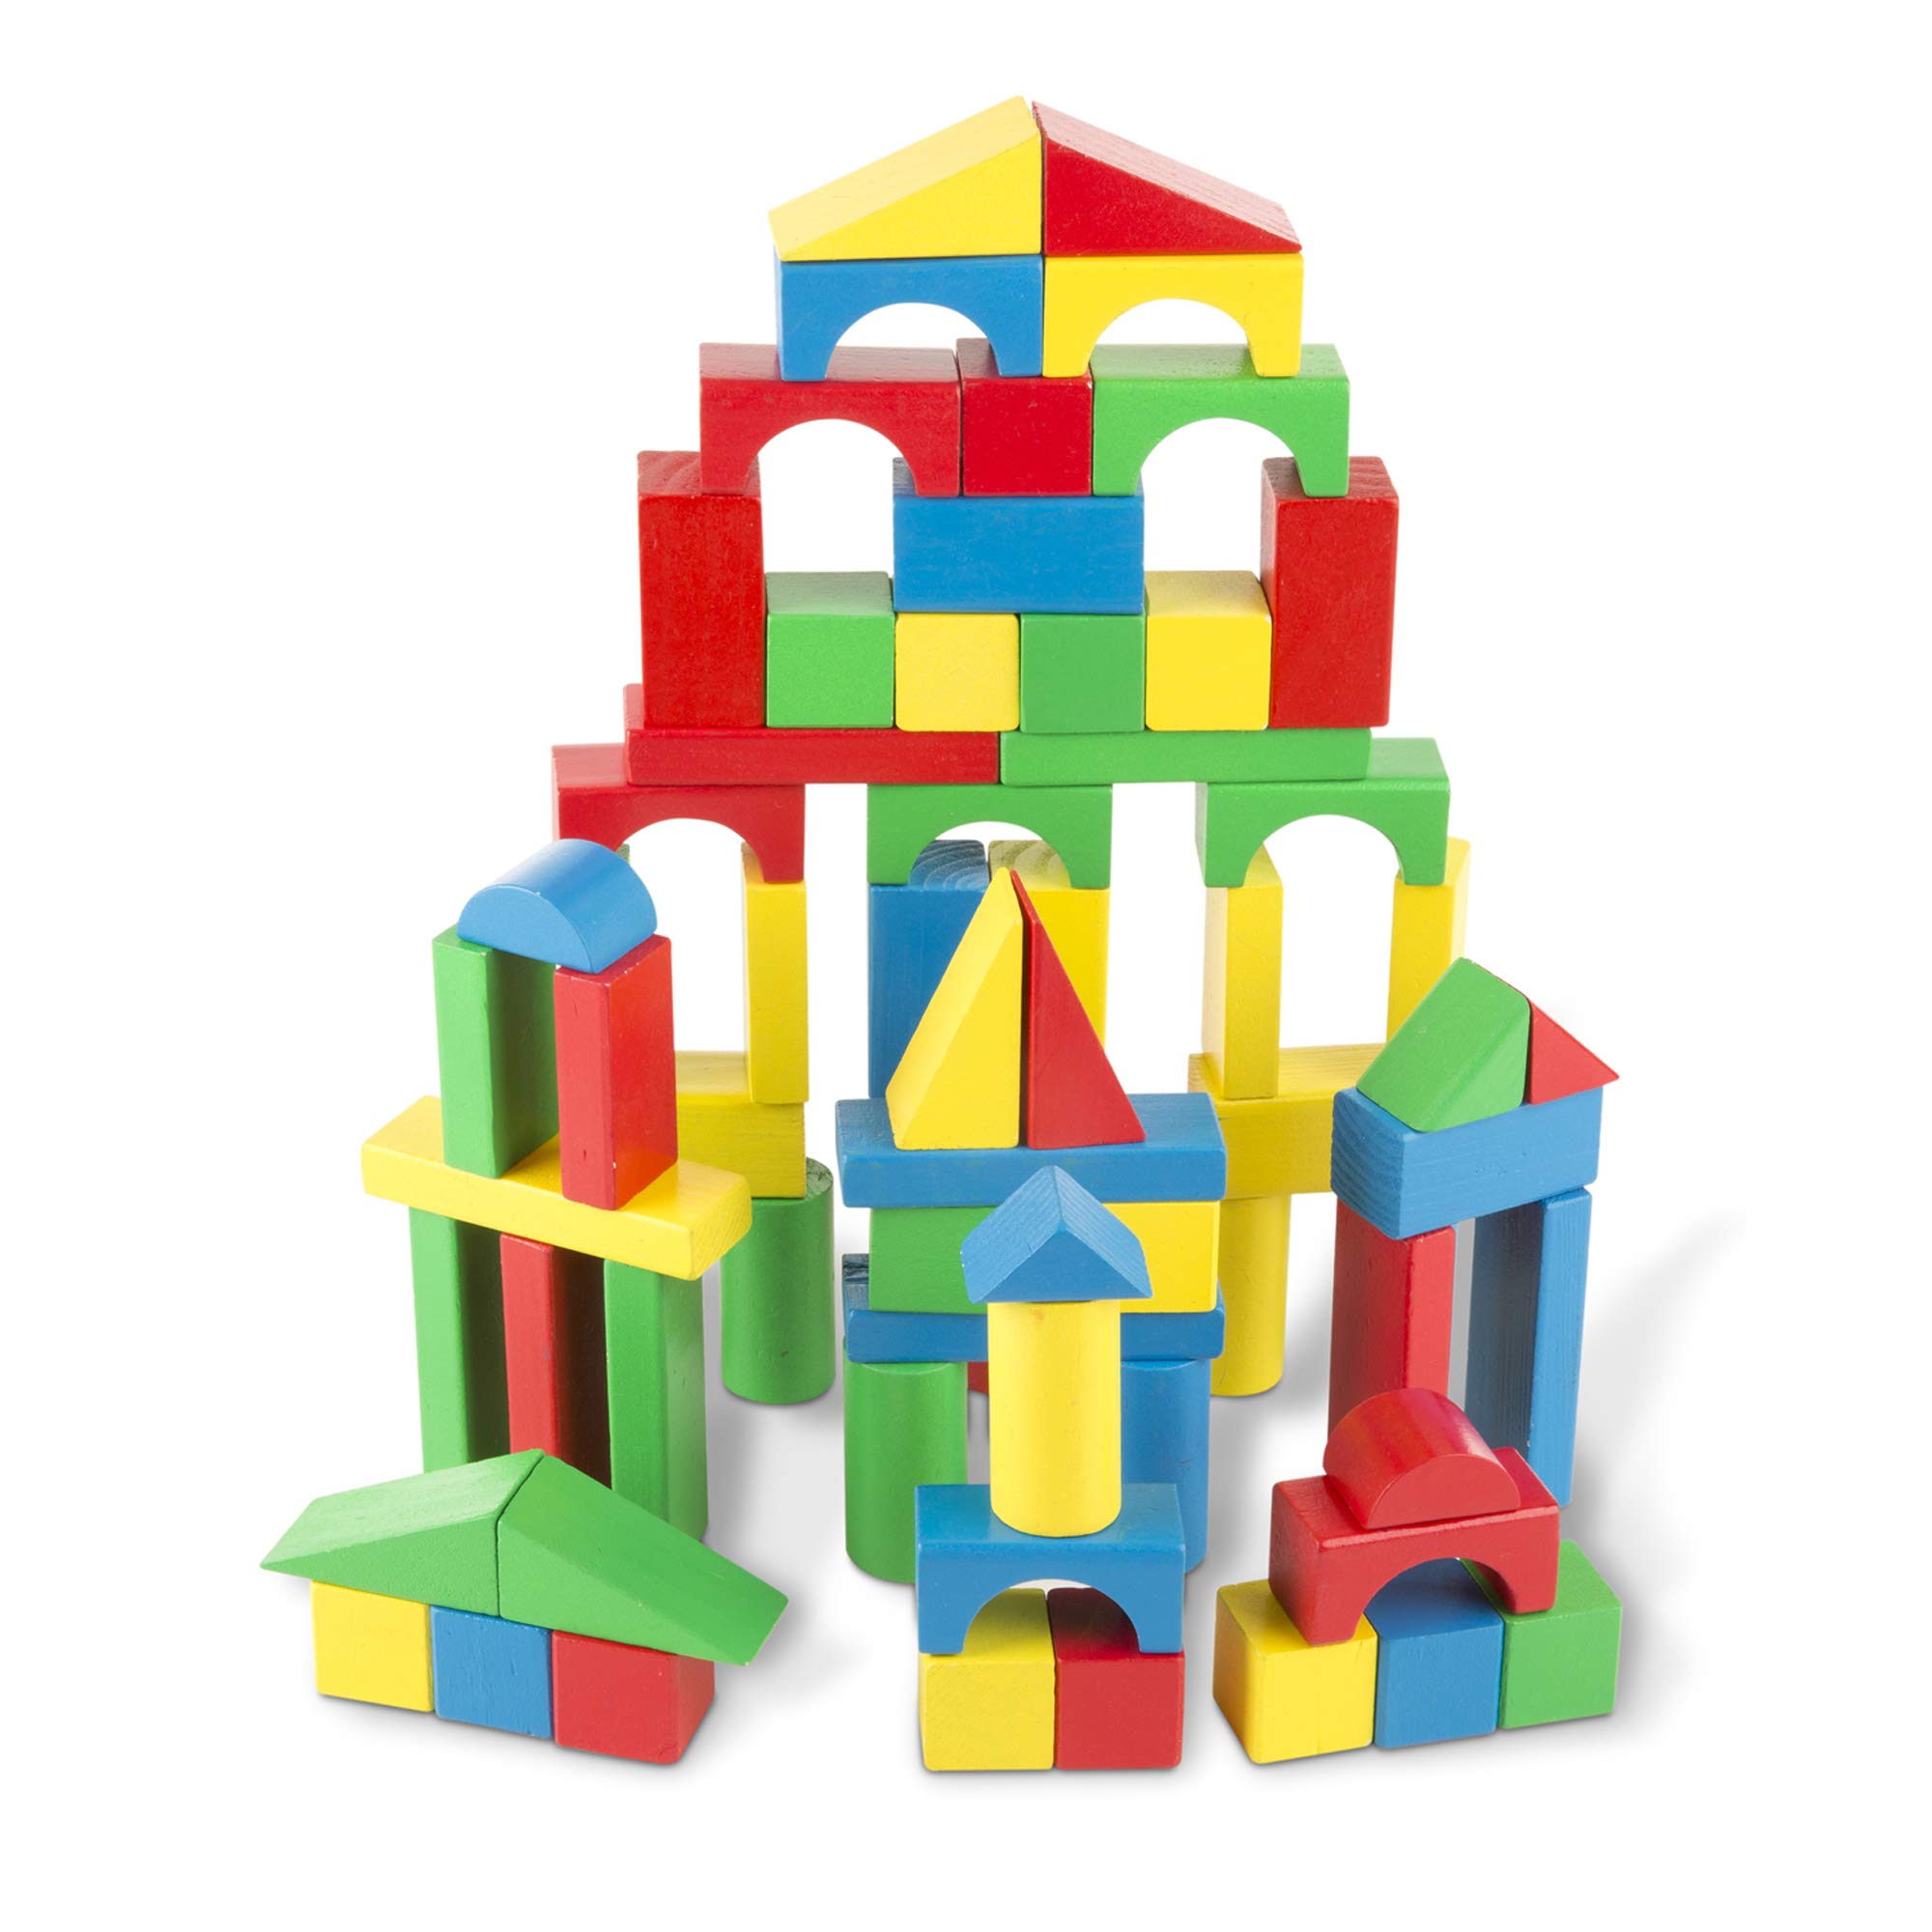 100-Piece Melissa & Doug Wooden Building Blocks Set $10 + Free Shipping w/ Prime or on $35+